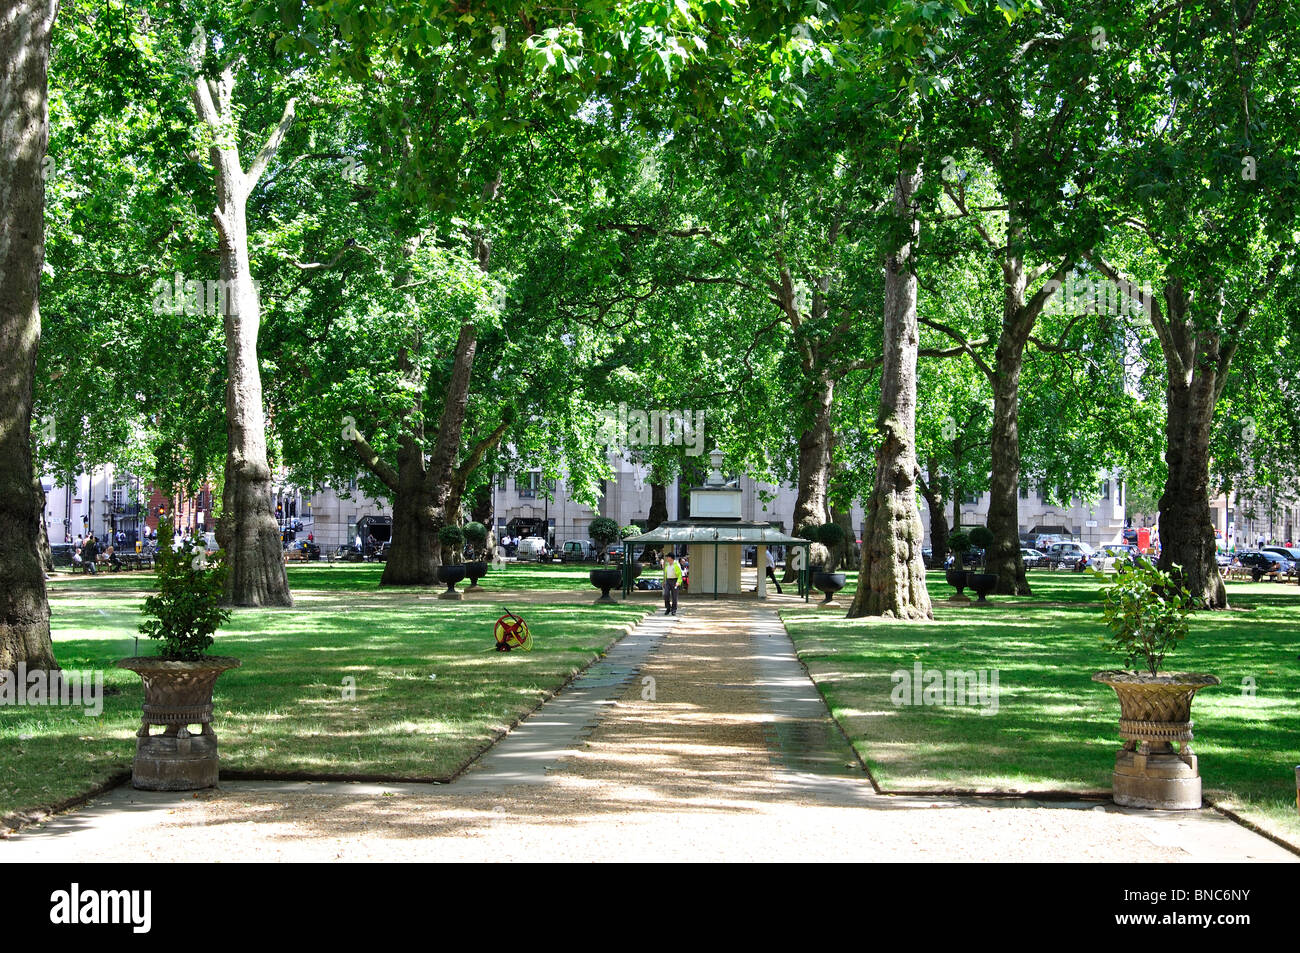 Berkeley Square, Mayfair, City of Westminster, Greater London, England, Regno Unito Foto Stock